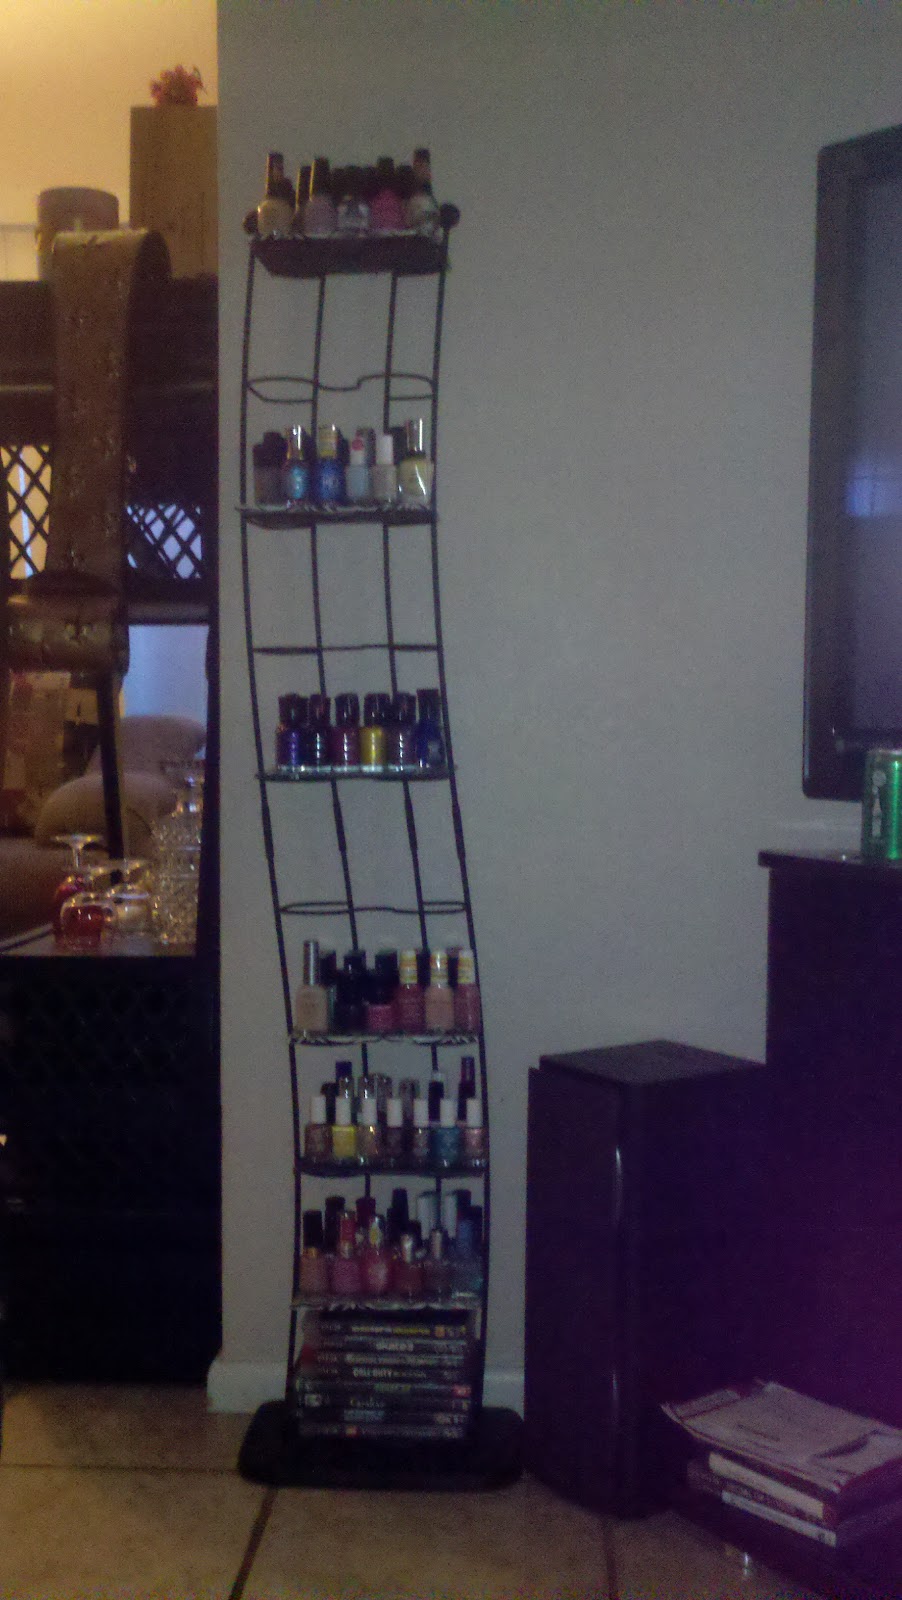 SO, this is my homemade nail polish rack that I made out of my dvd holder!